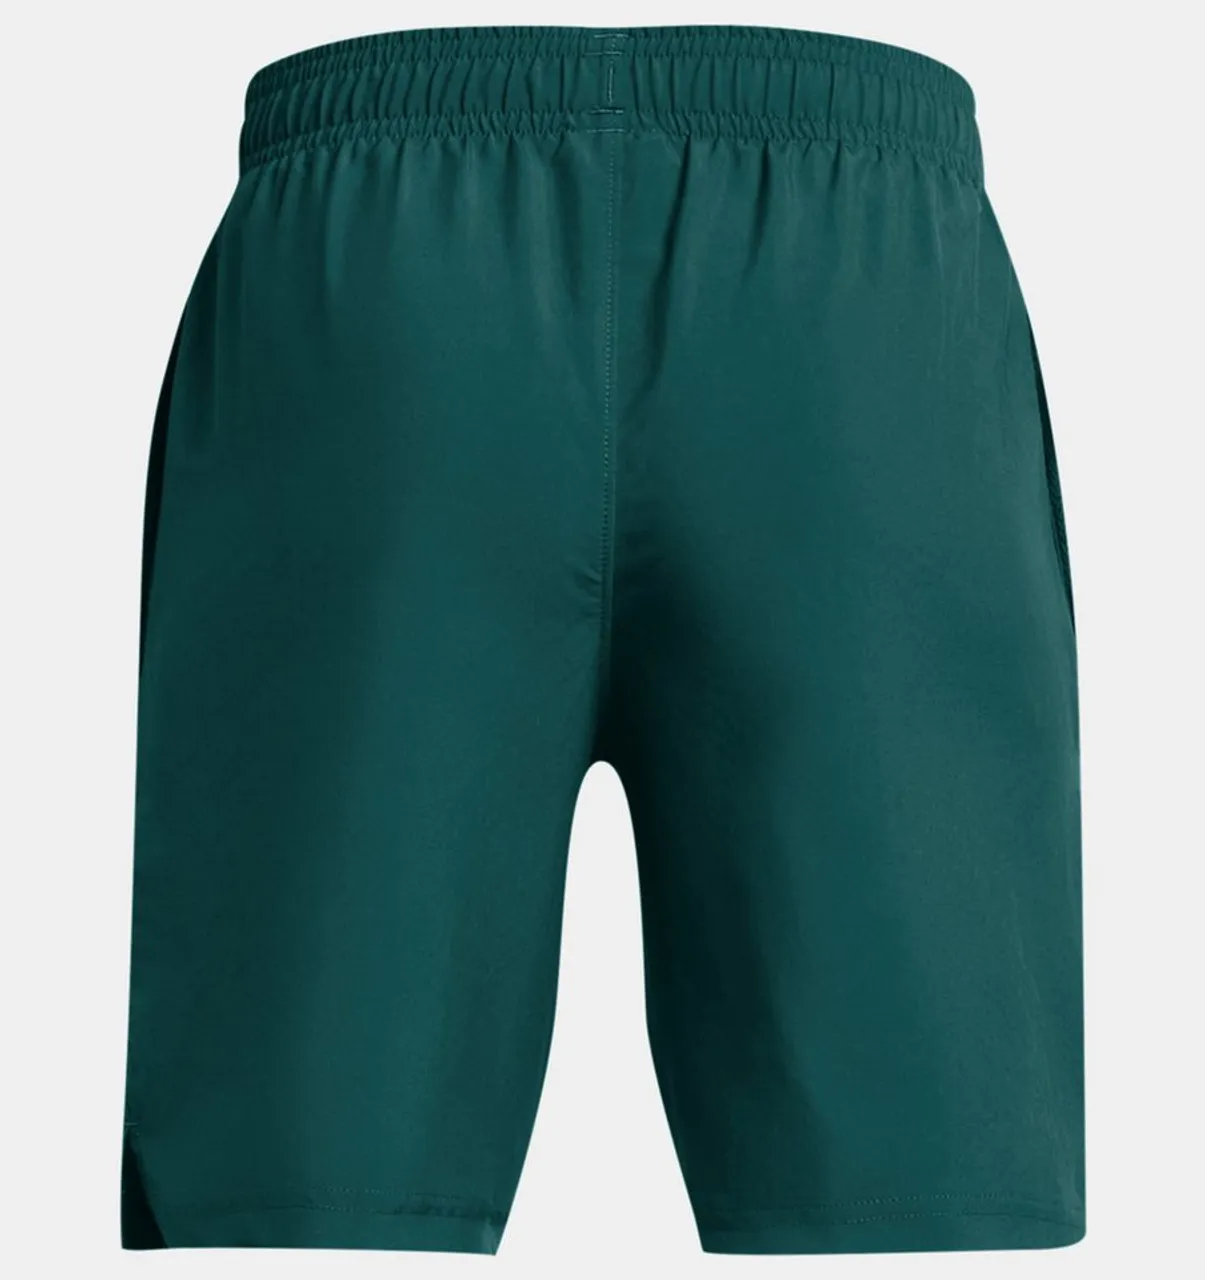 Under Armour® Funktionsshorts UA WOVEN WDMK SHORTS HYDRO TEAL